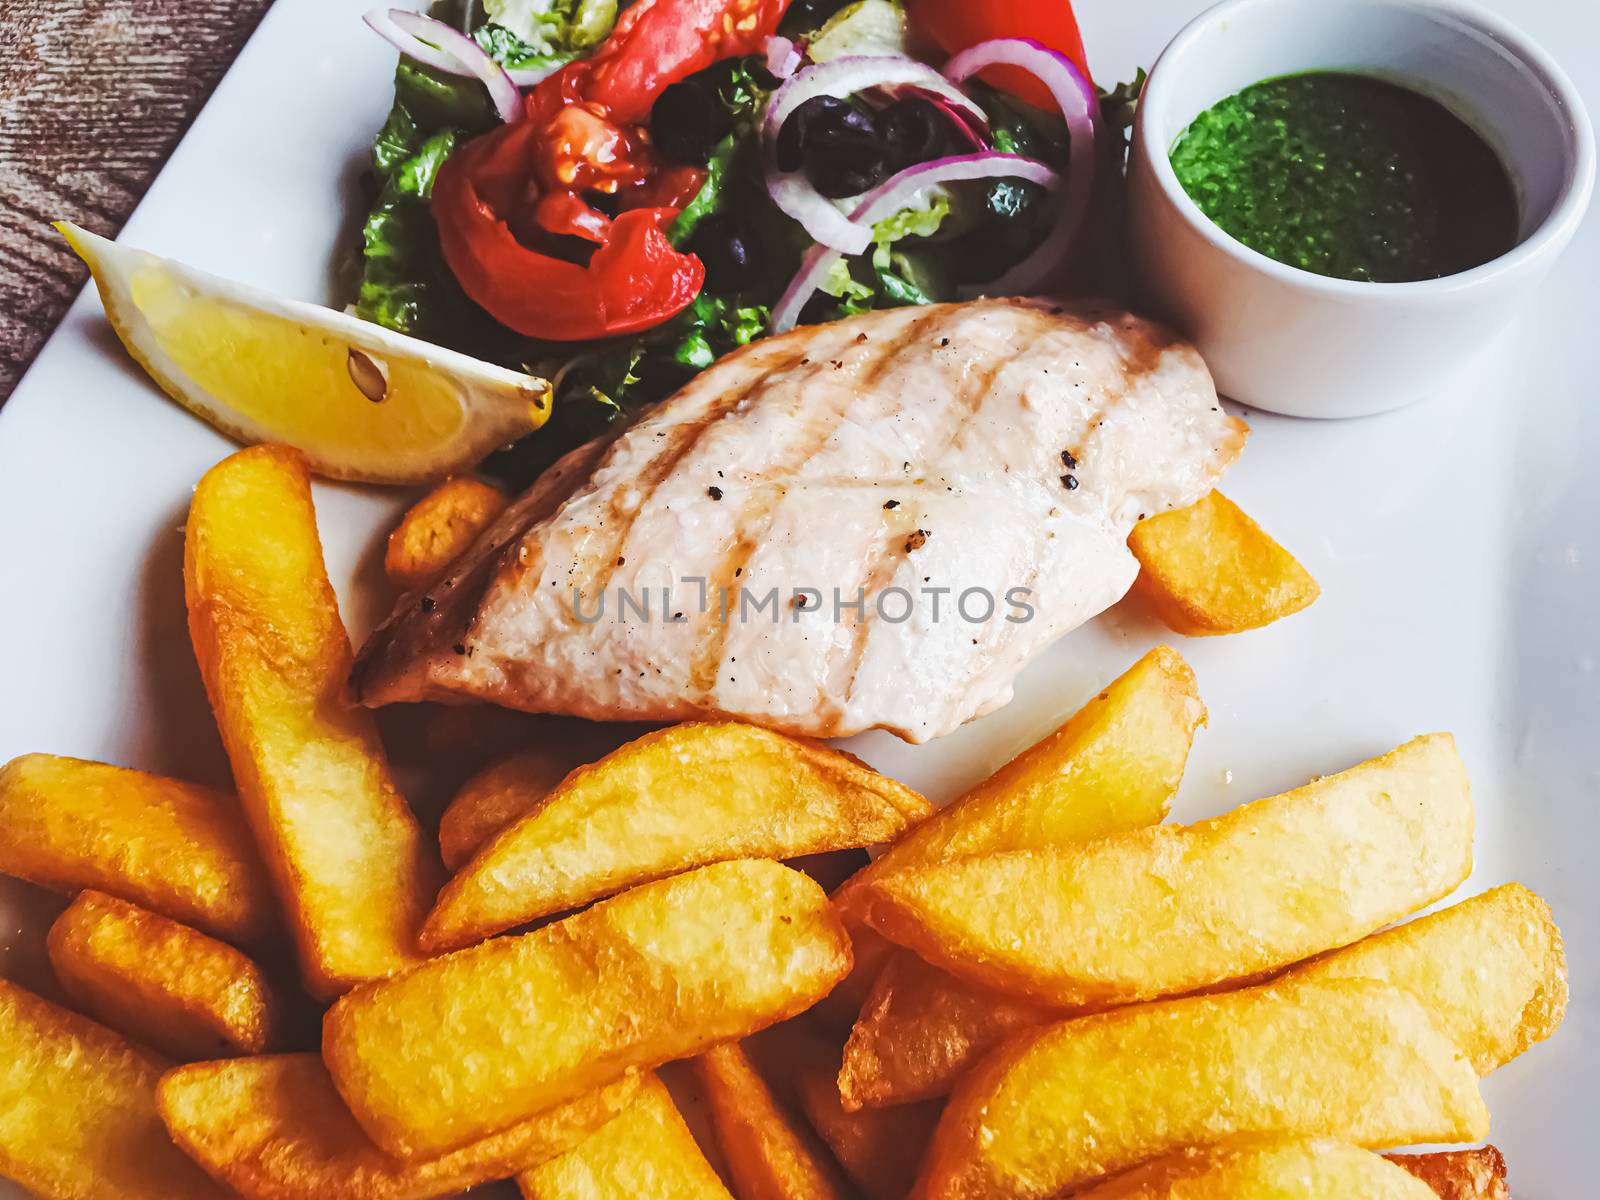 Grilled chicken, french fries and salad for lunch by Anneleven